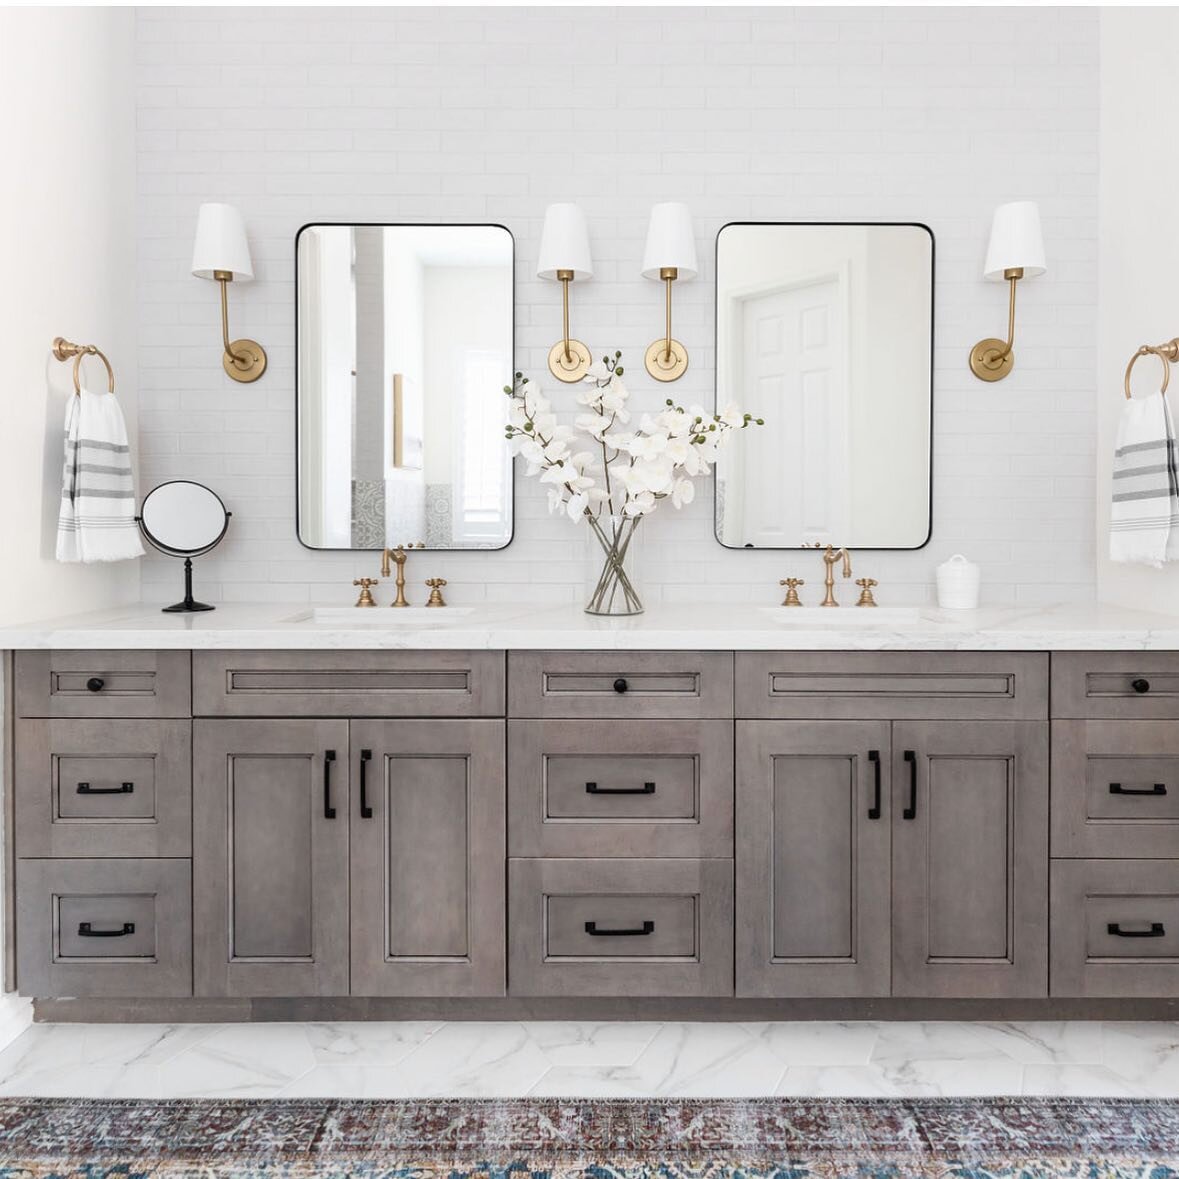 I&rsquo;m in awe with how this bathroom turned out! This client did not know what she wanted&hellip;timeless or trendy? Farmhouse modern or classic? What will eventually sell better down the road? I must say she acquired the perfect combination of wh